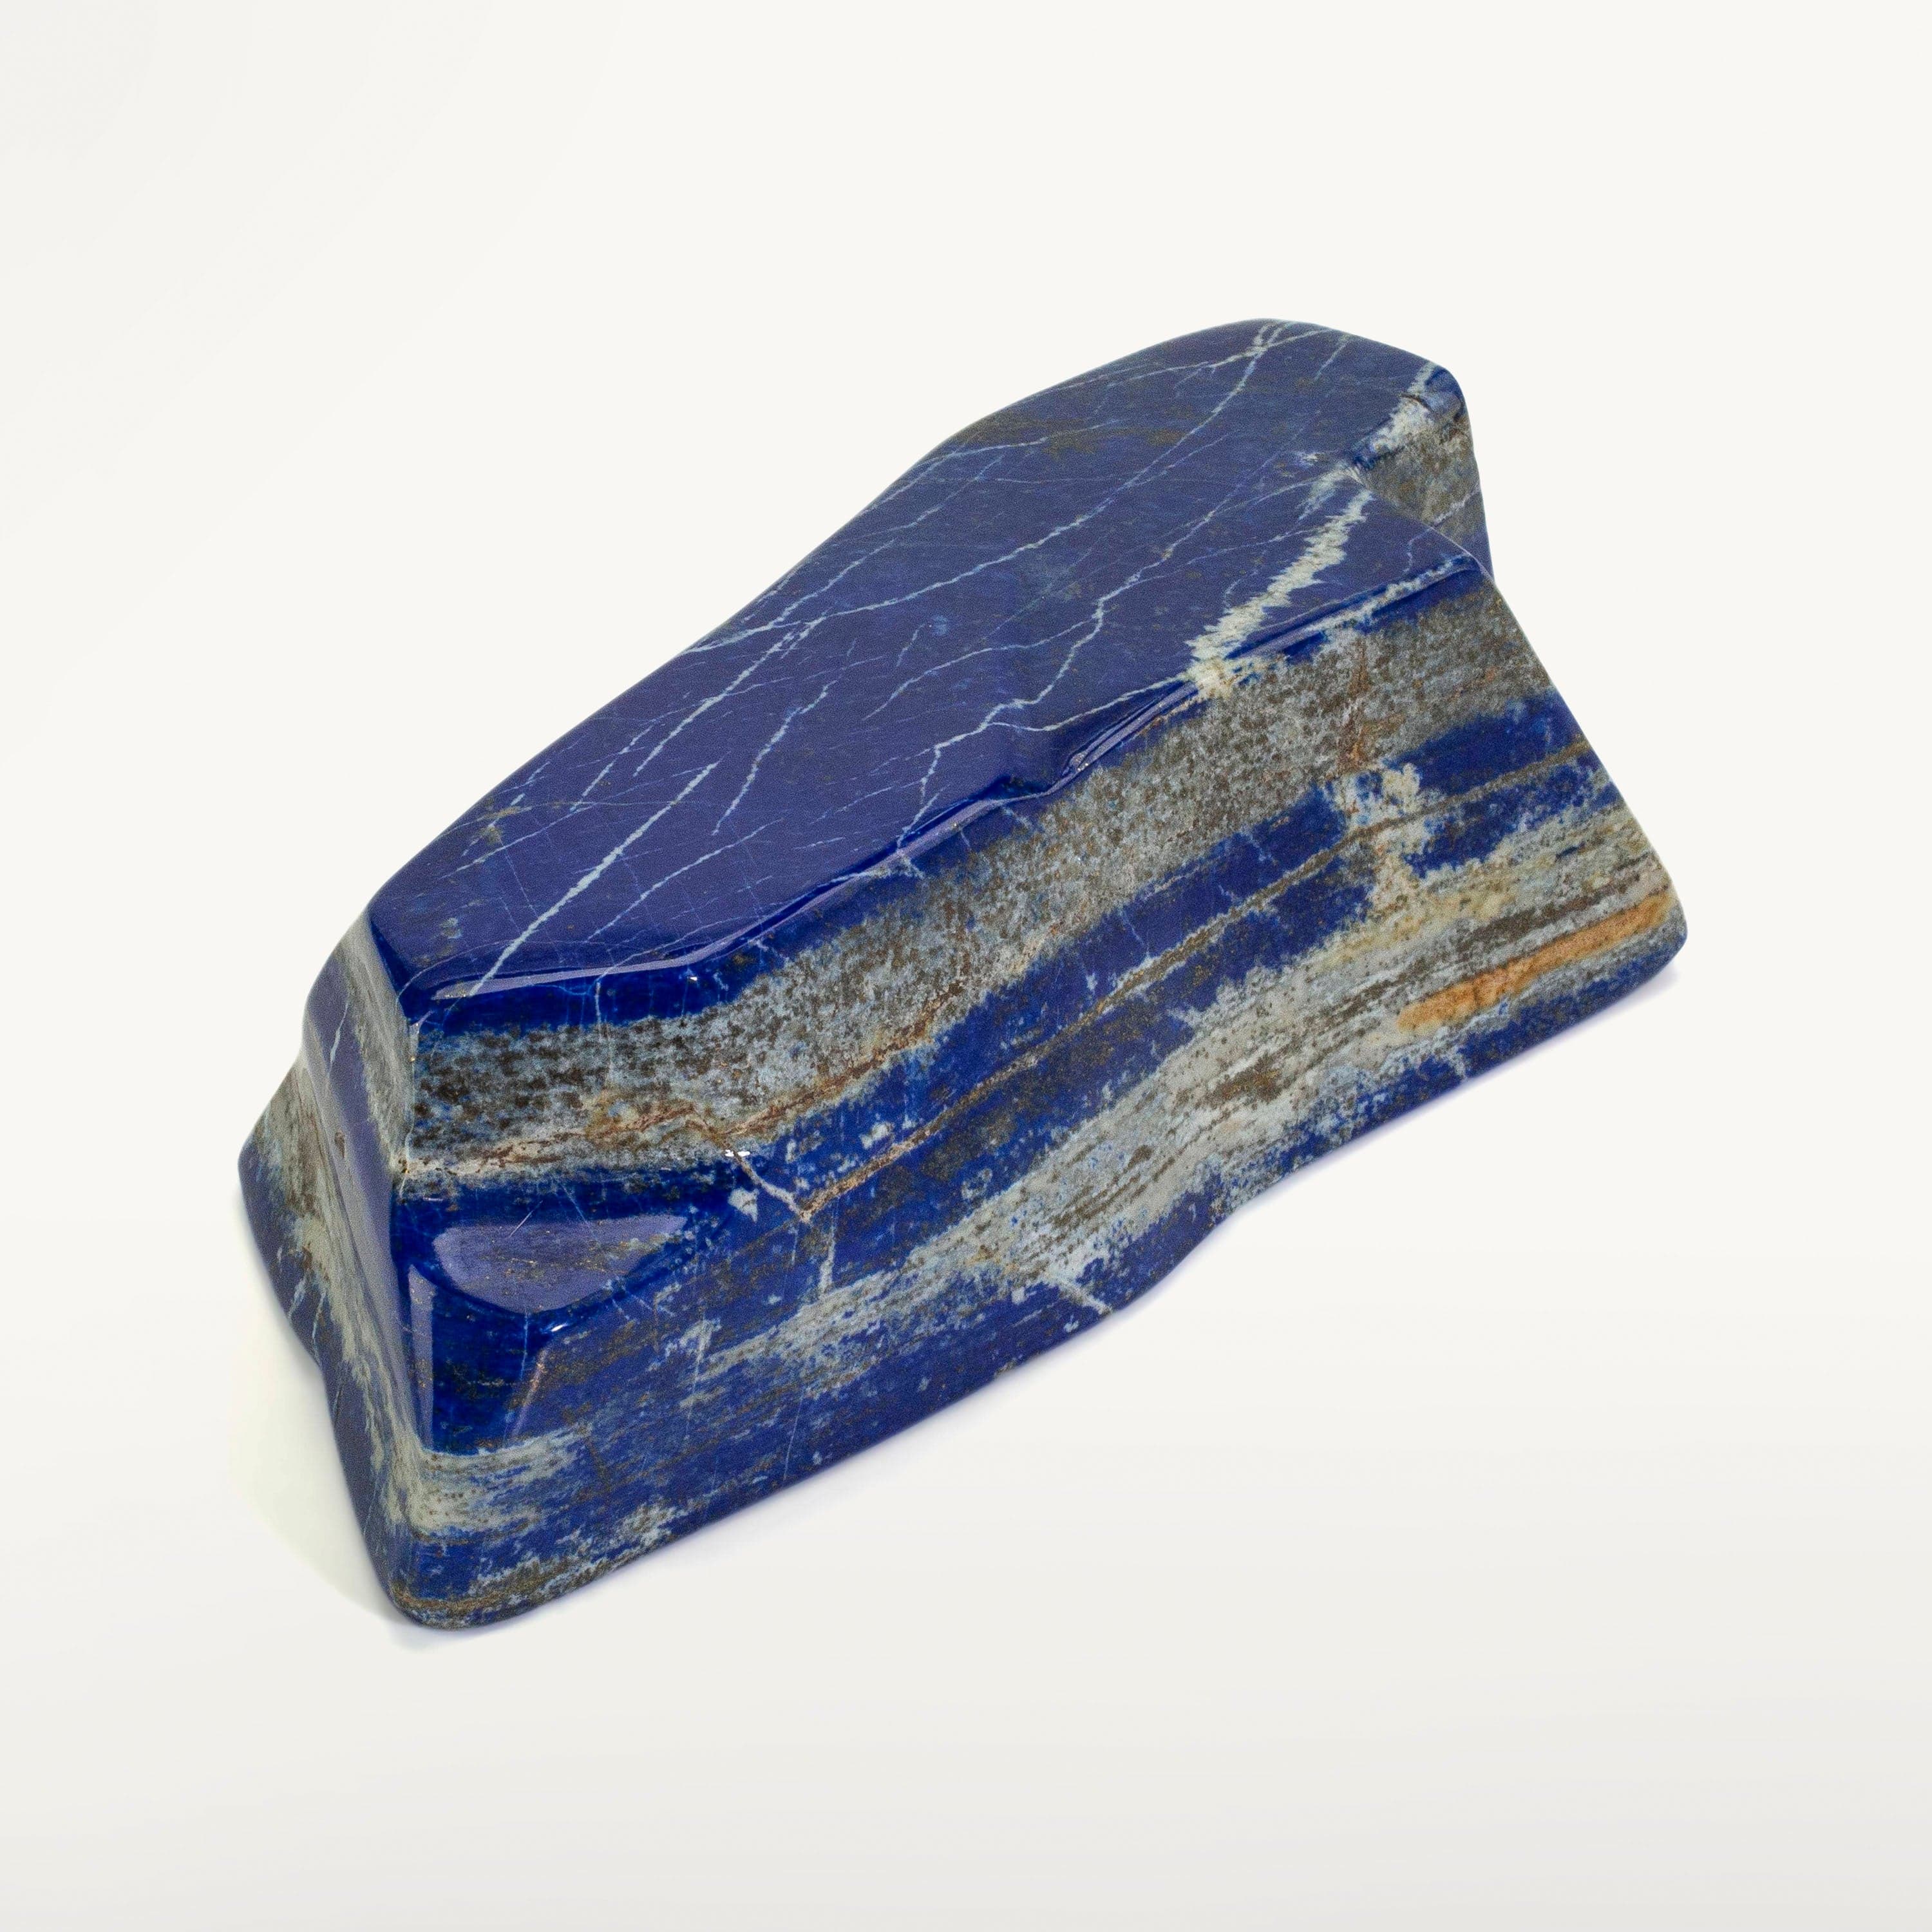 Kalifano Lapis Lapis Lazuil Freeform from Afghanistan - 1.5 kg / 3.3 lbs LP1600.003